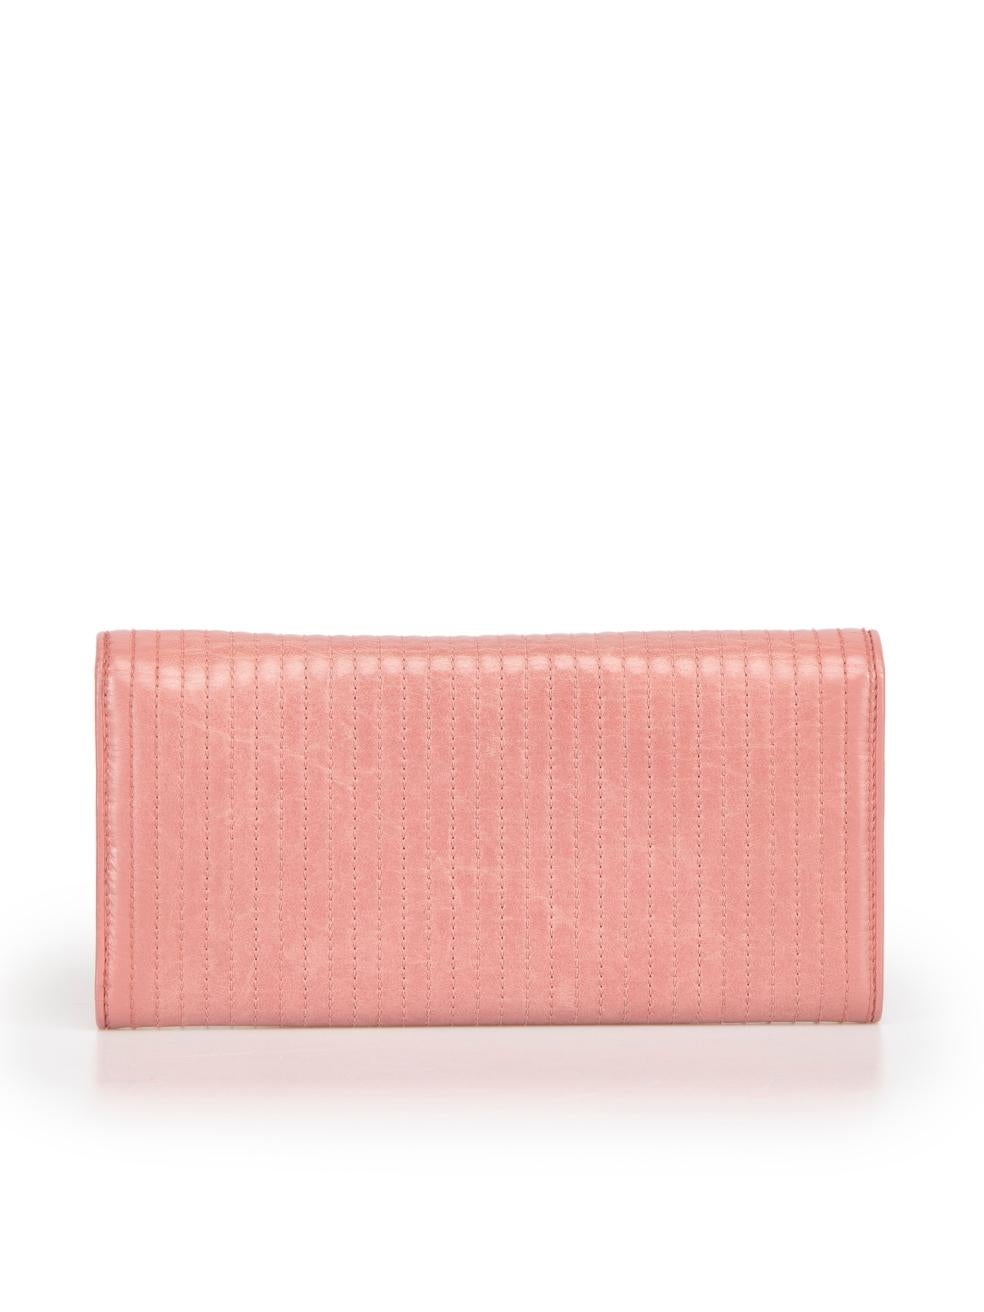 Miu Miu Pink Leather Quilted Continental Wallet In Good Condition For Sale In London, GB